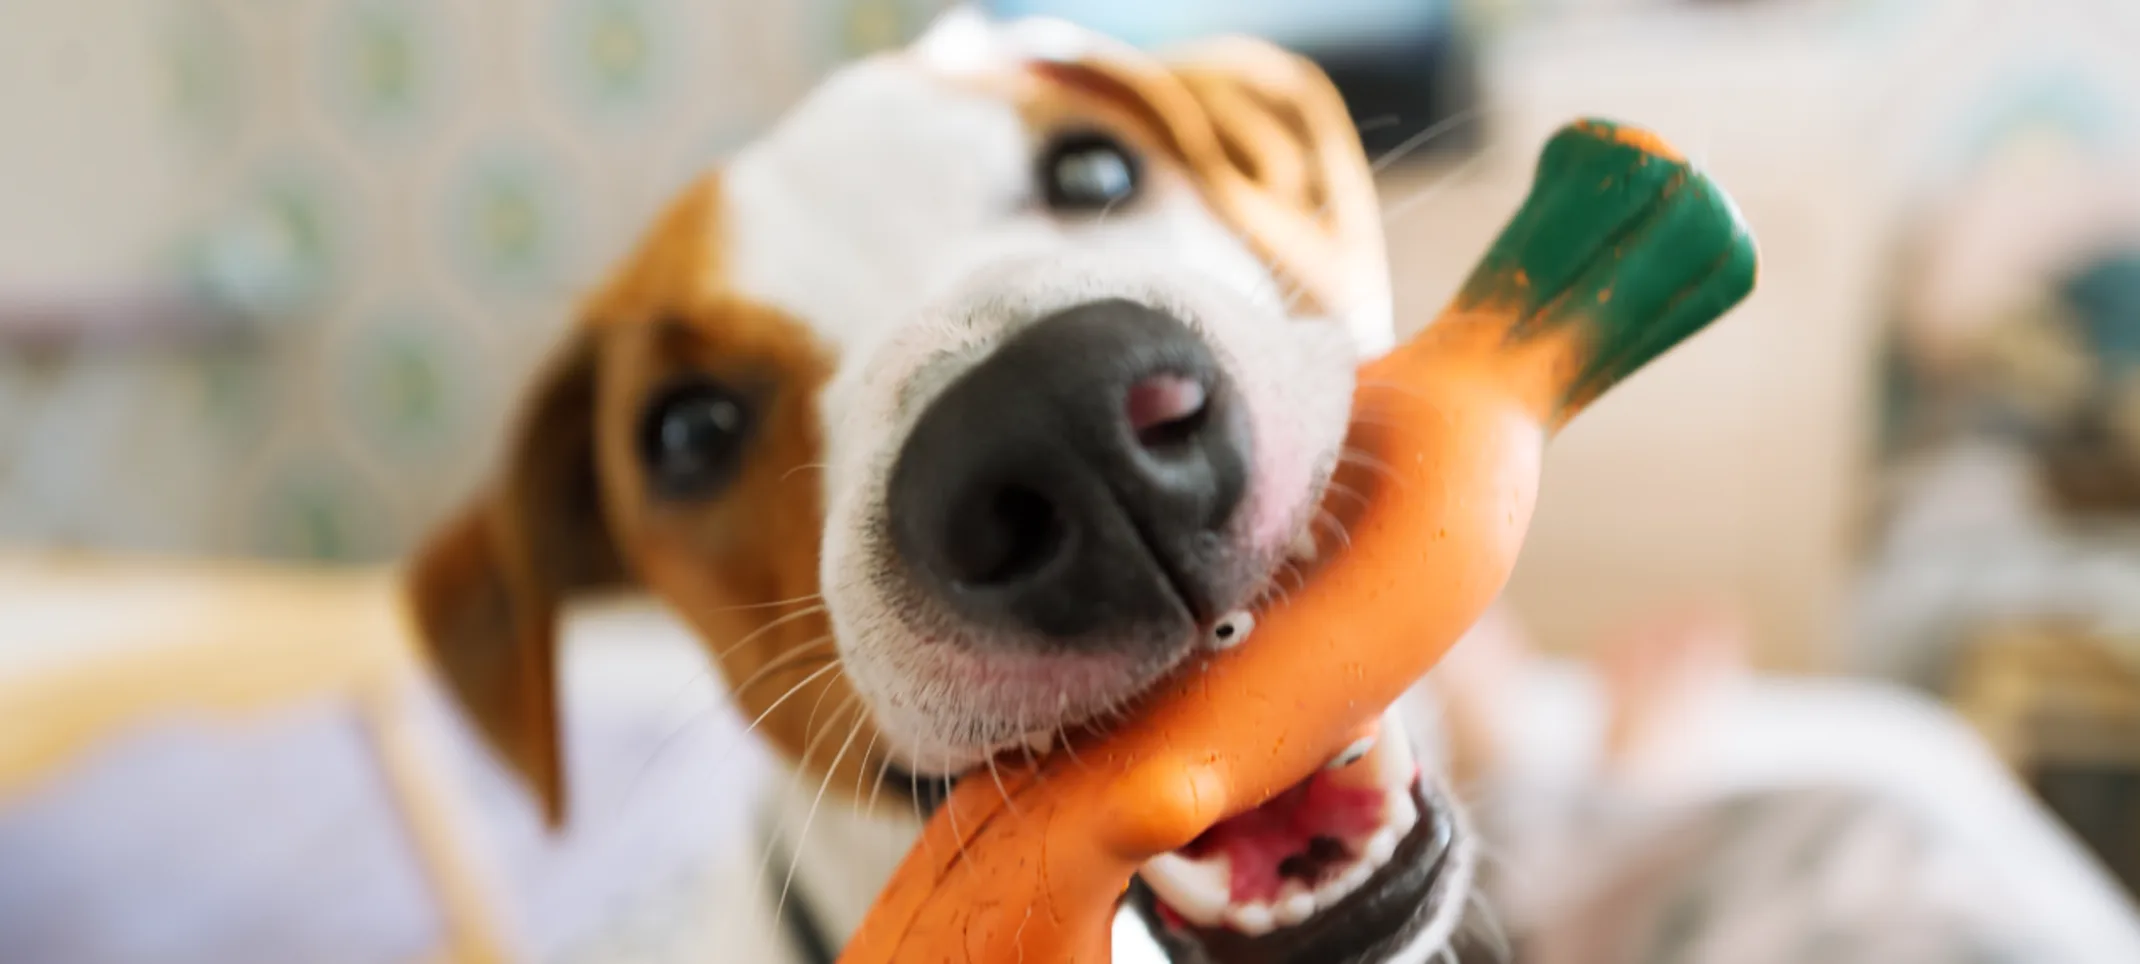 close up of a dog with a carrot toy in its mouth 